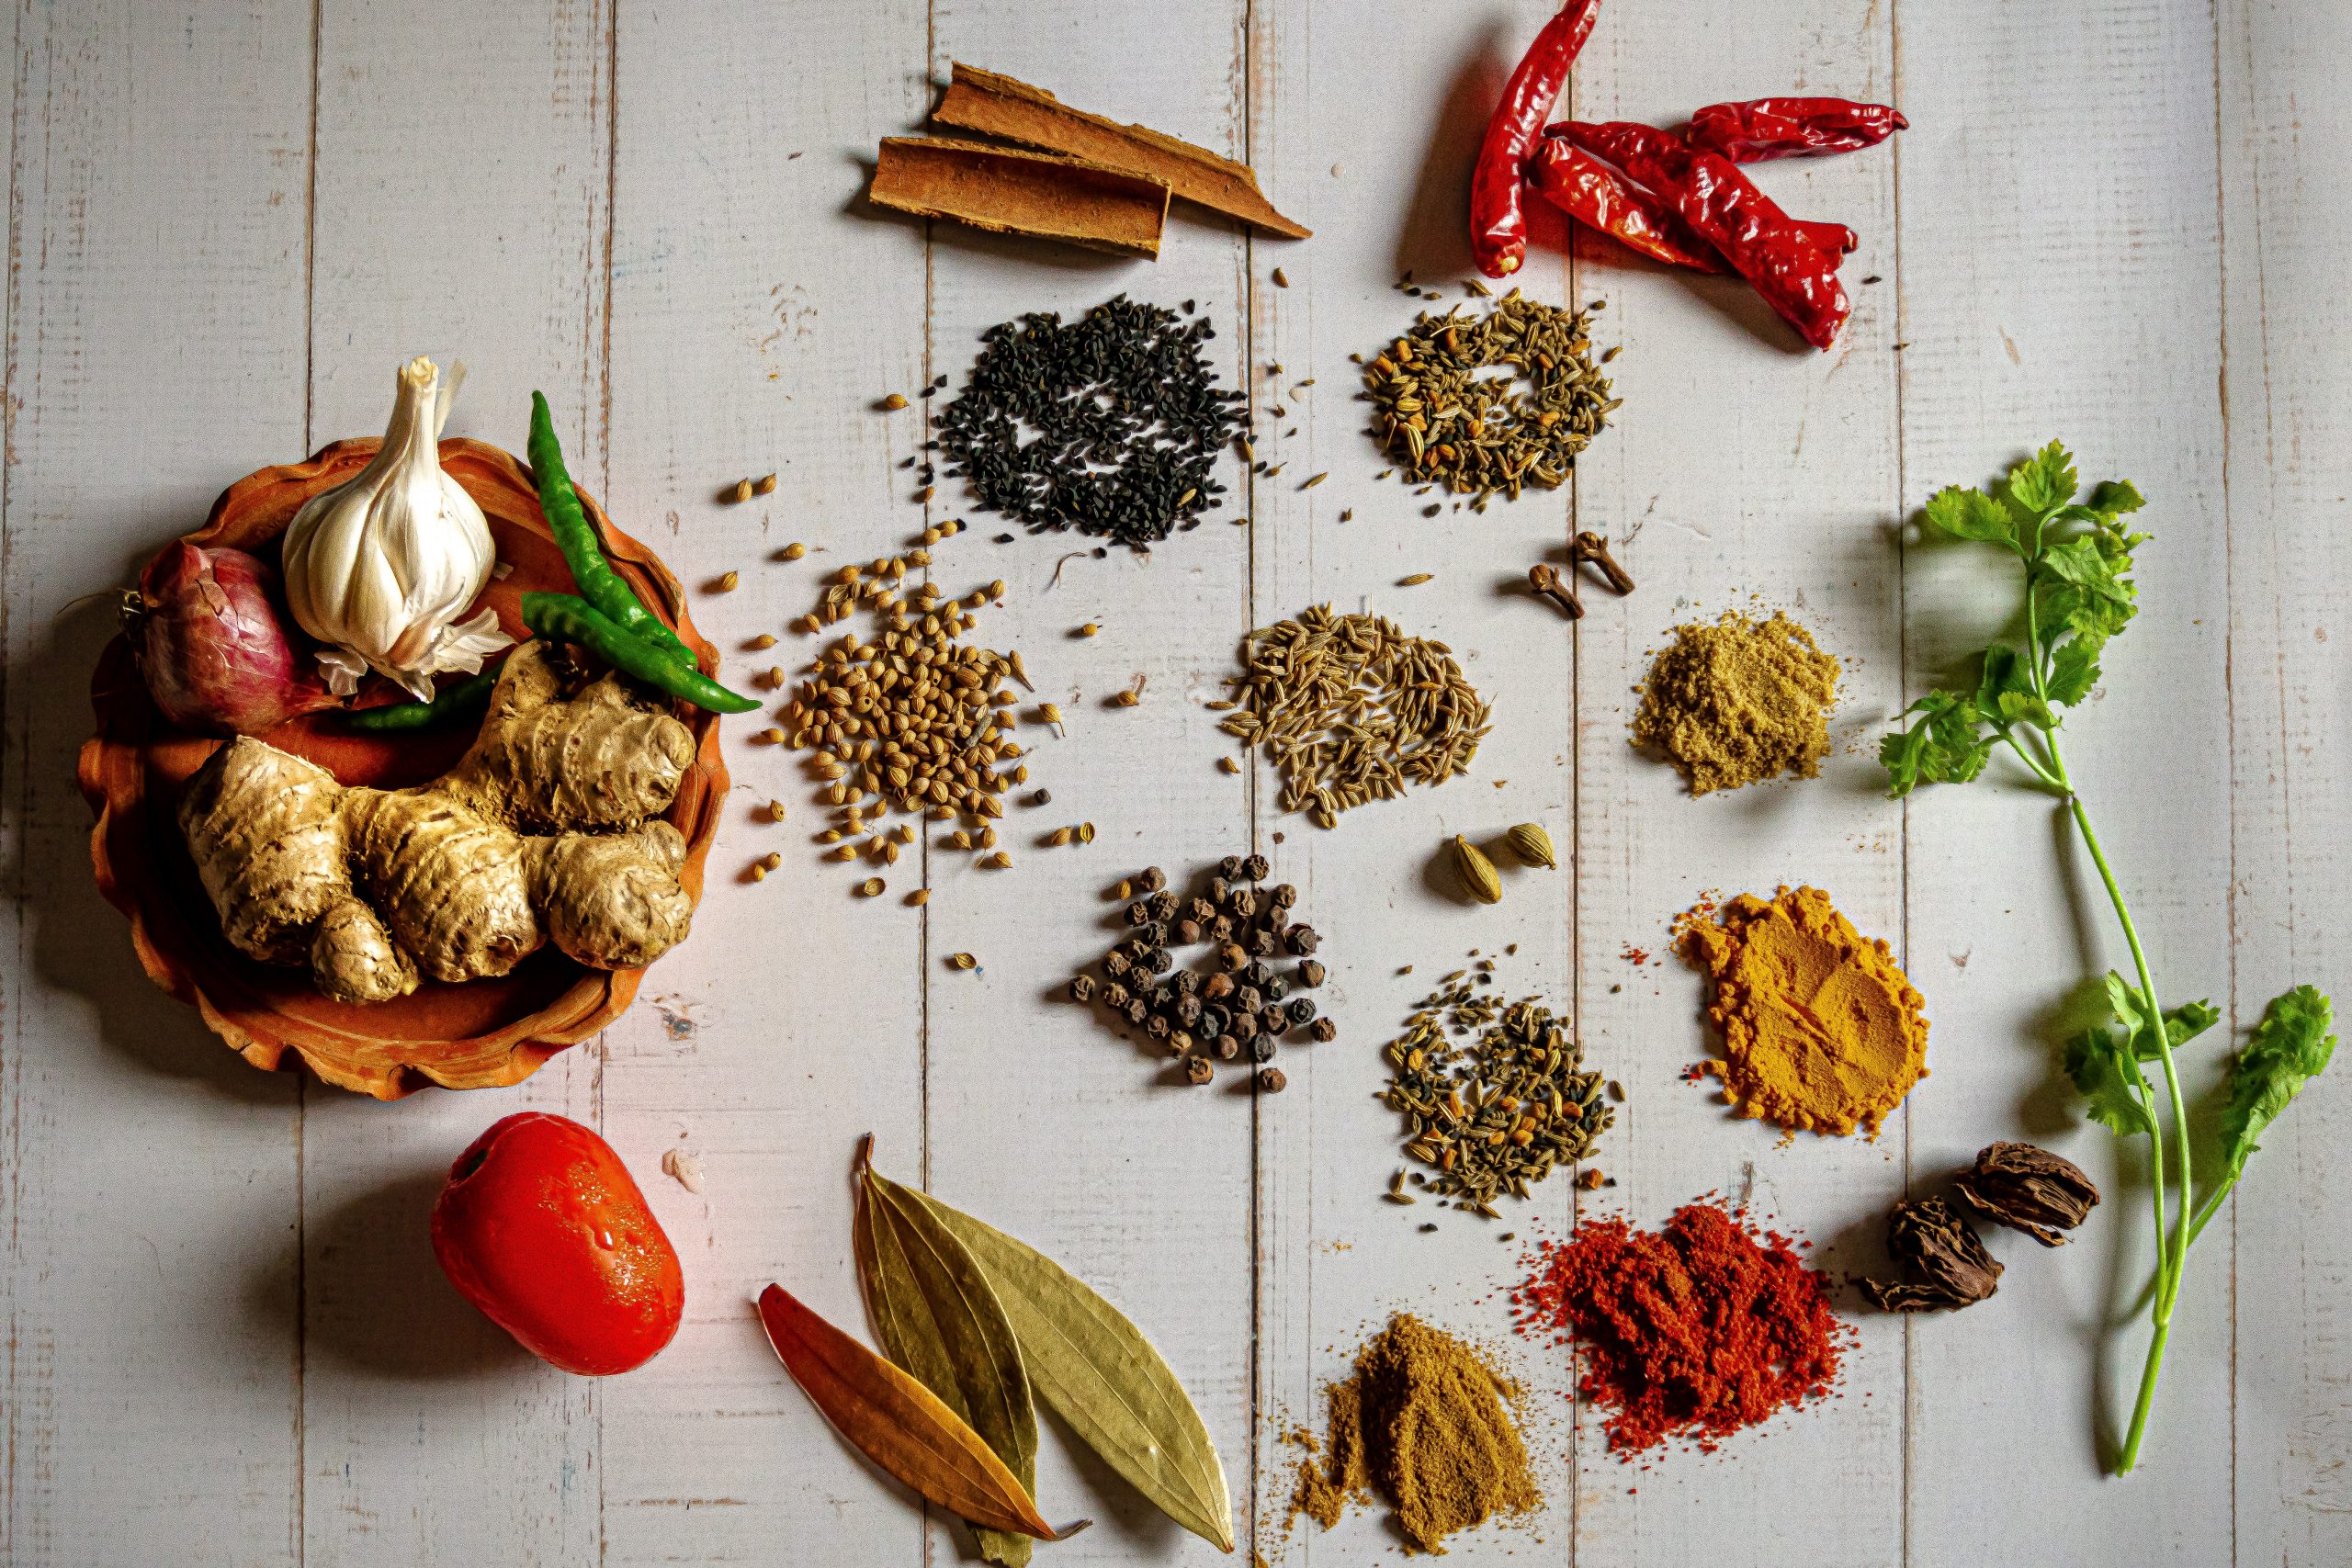 South Asian spices